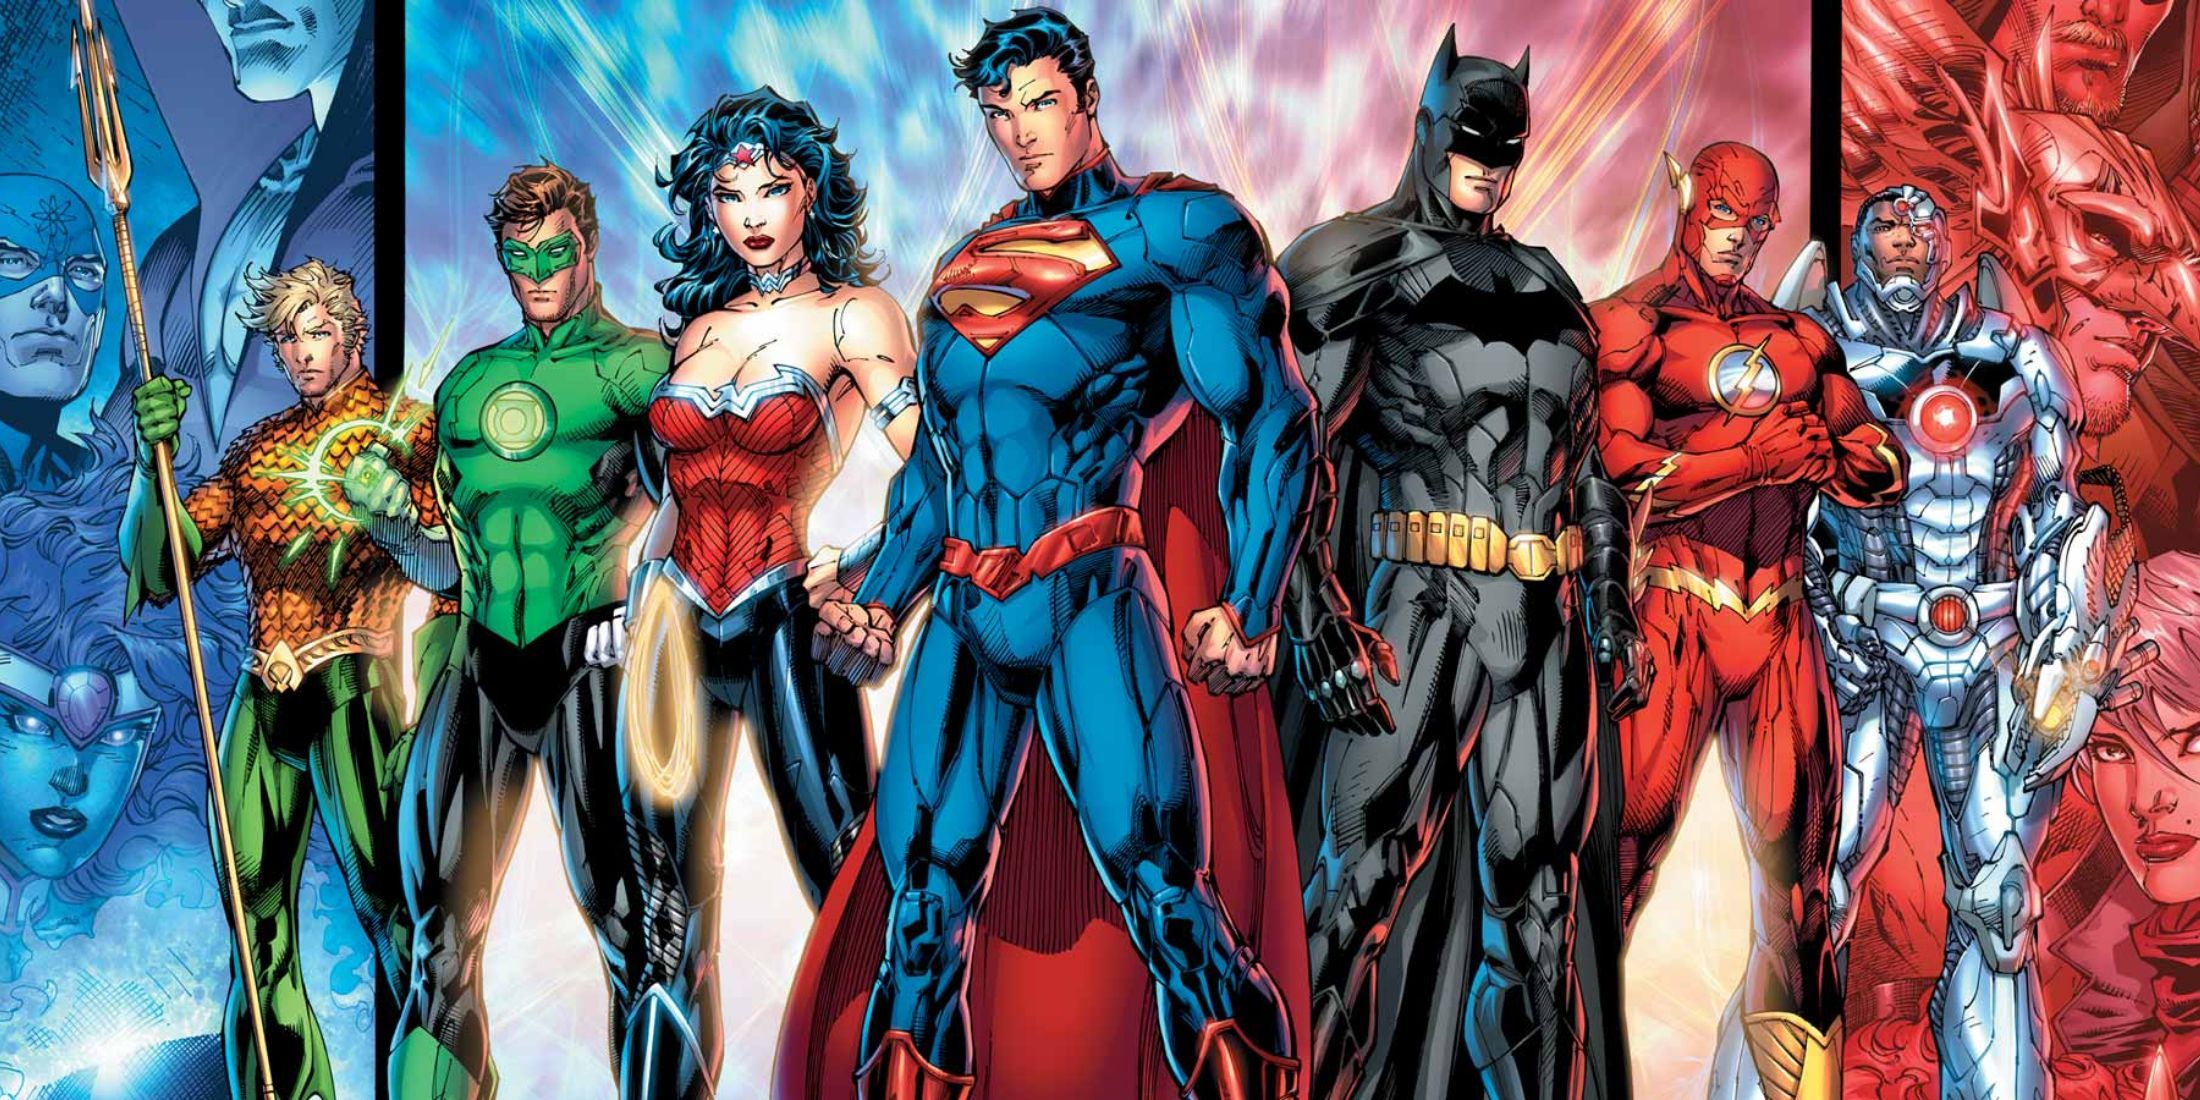 The members of the Justice League, including Superman, Batman, and Wonder Woman